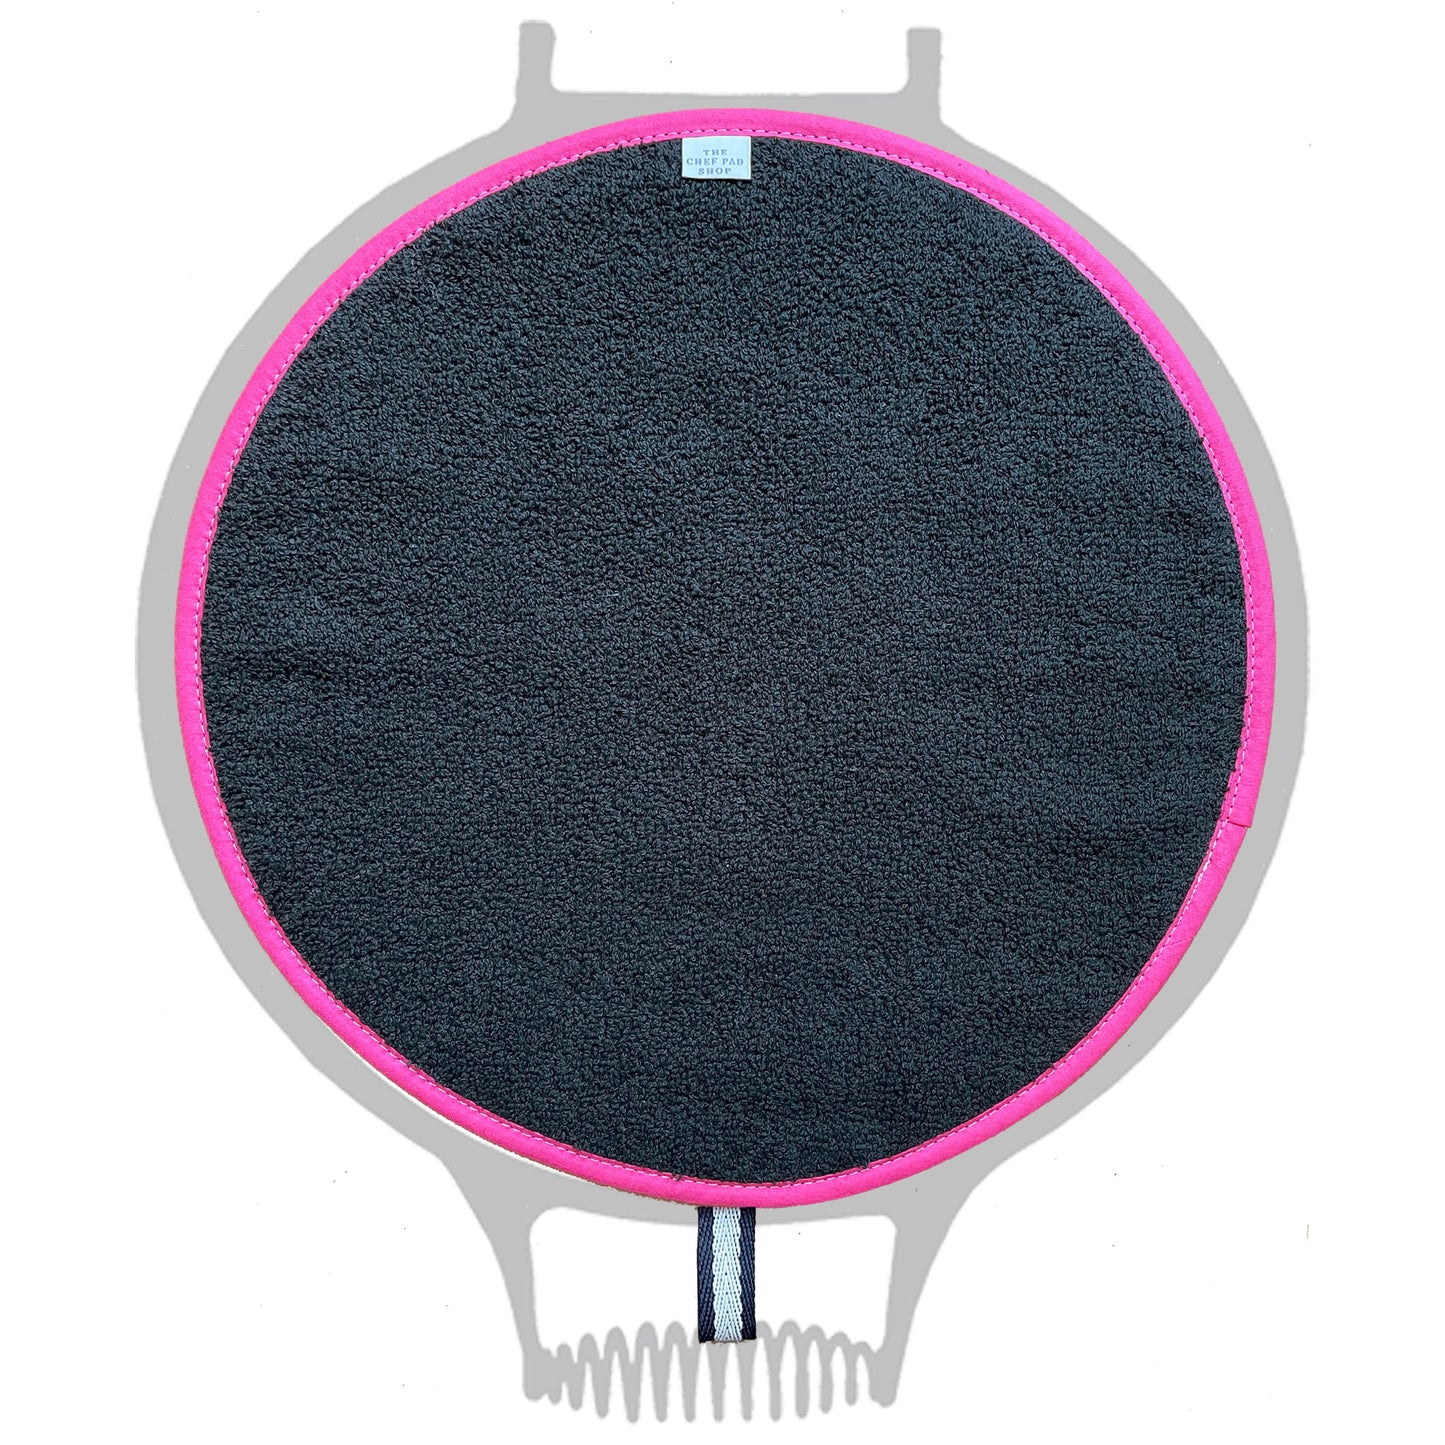 Chef Pad - Aga - The Chef Pad Shop - Insulate Range: Black & Cream Chefs Pad with Pink Binding For Use With Aga Cookers